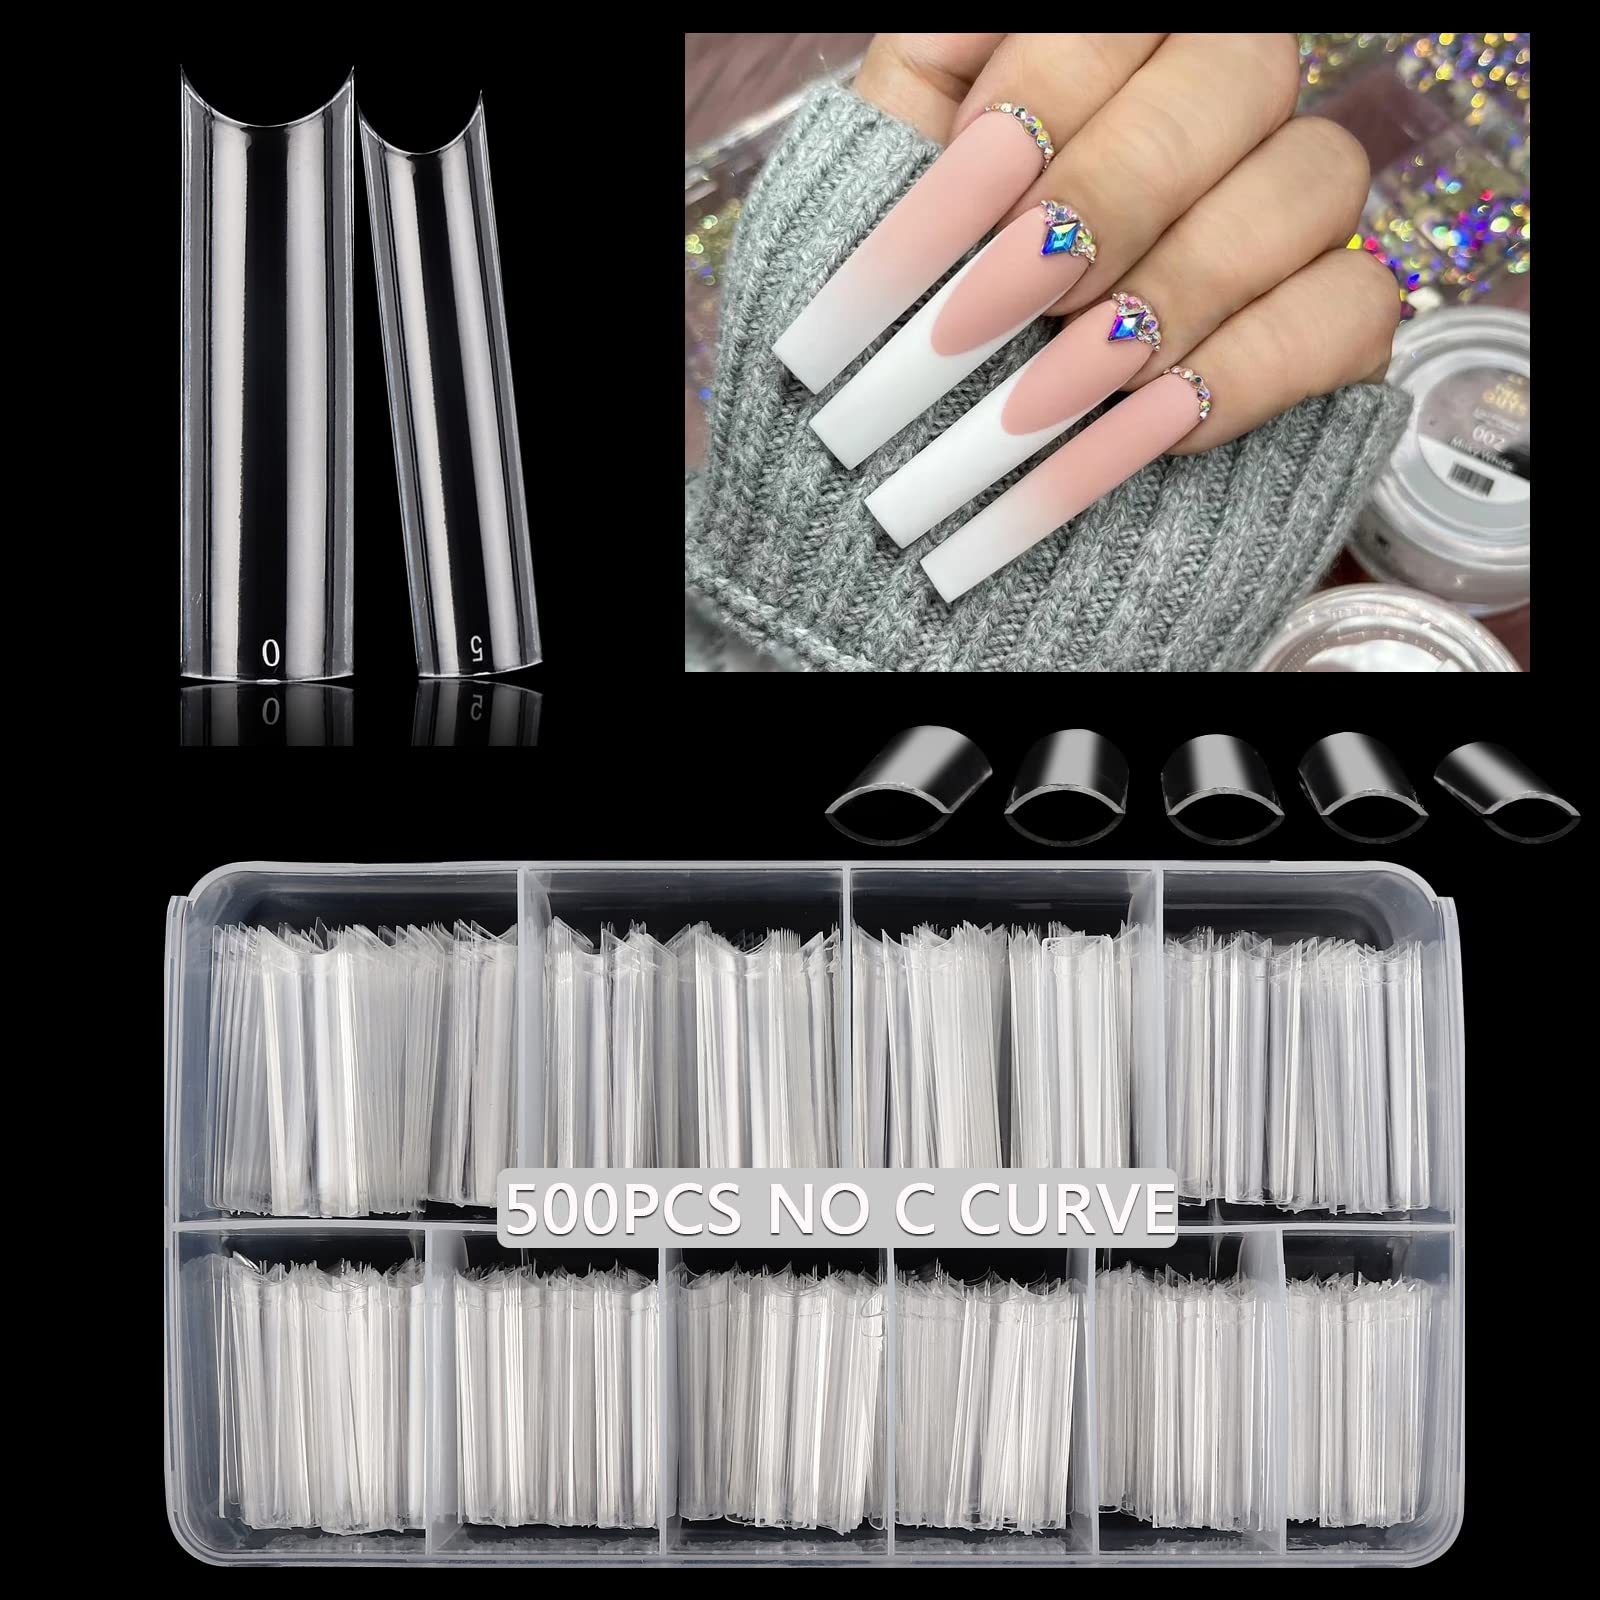 PROFESSIONAL NAIL TIPS | Aesthetic Creationz